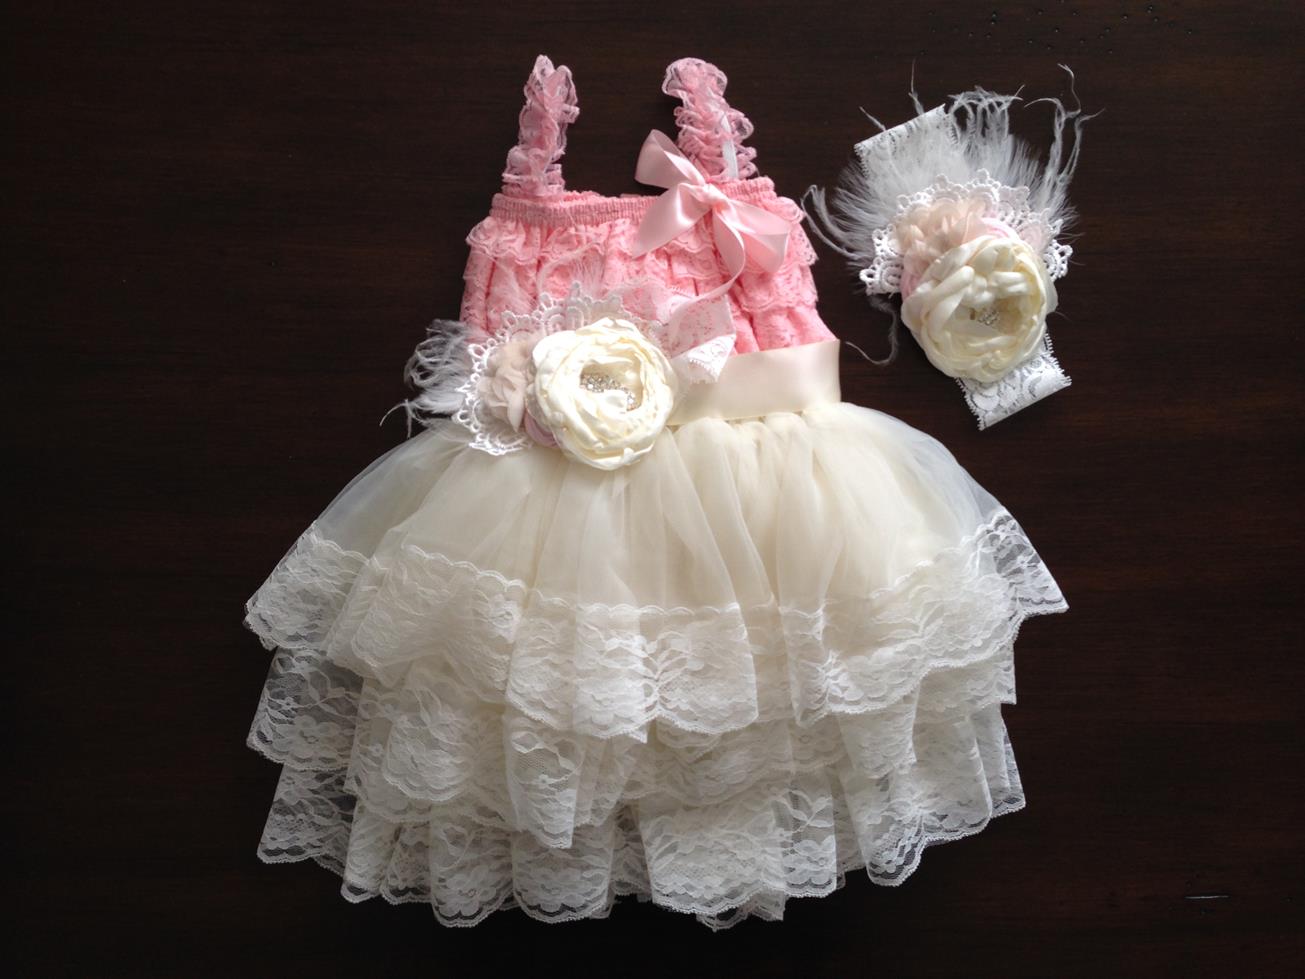 Lace Romper and Fluffy Lace Skirt with Headband & Sash